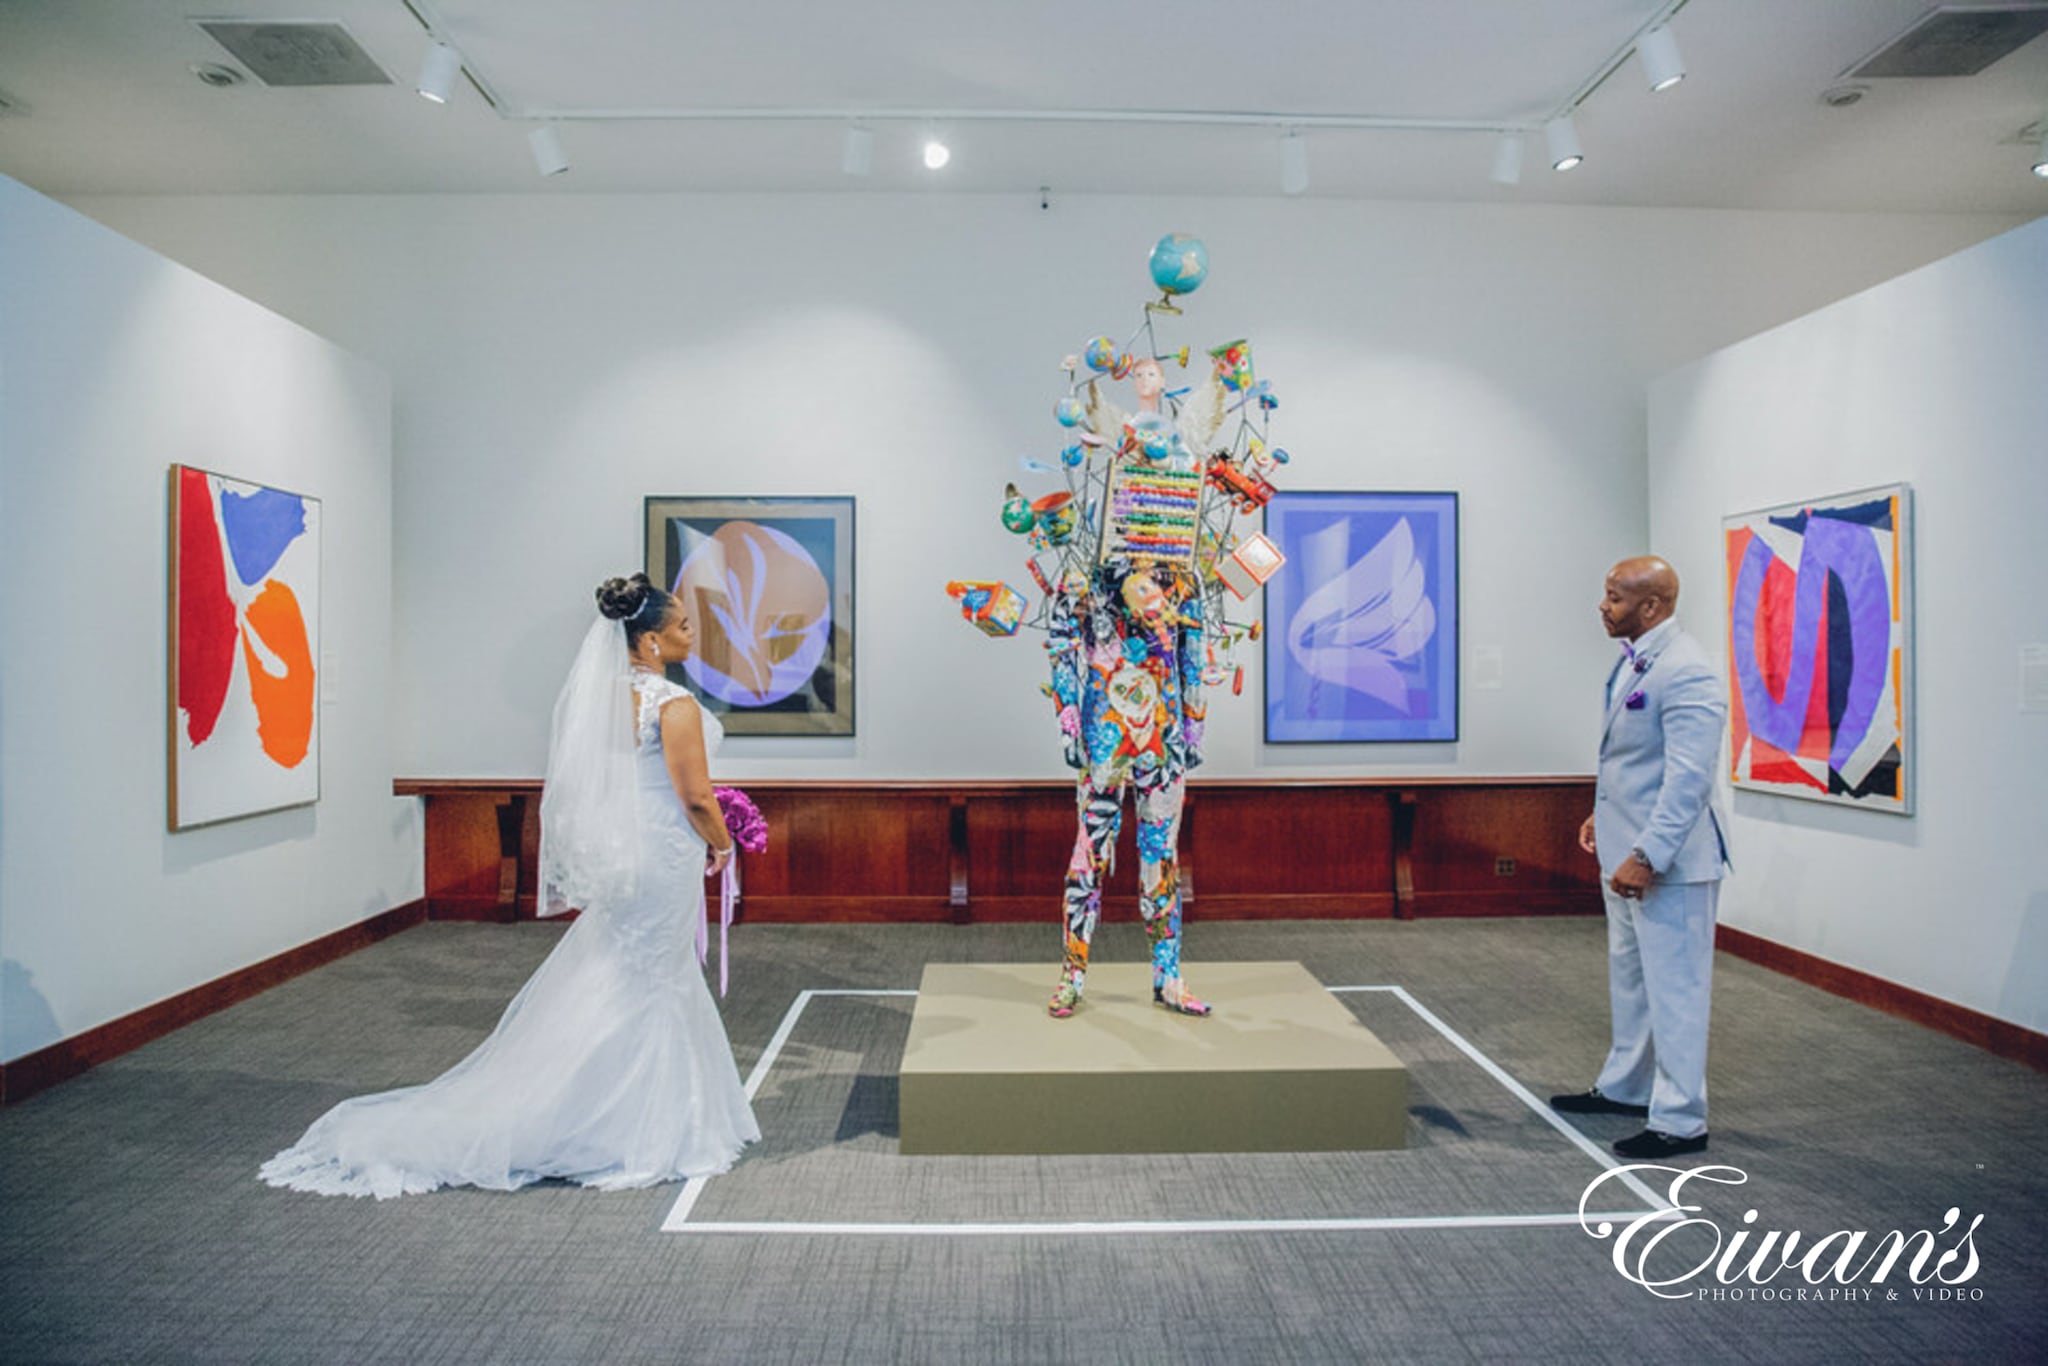 image of a married couple standing in an art gallery